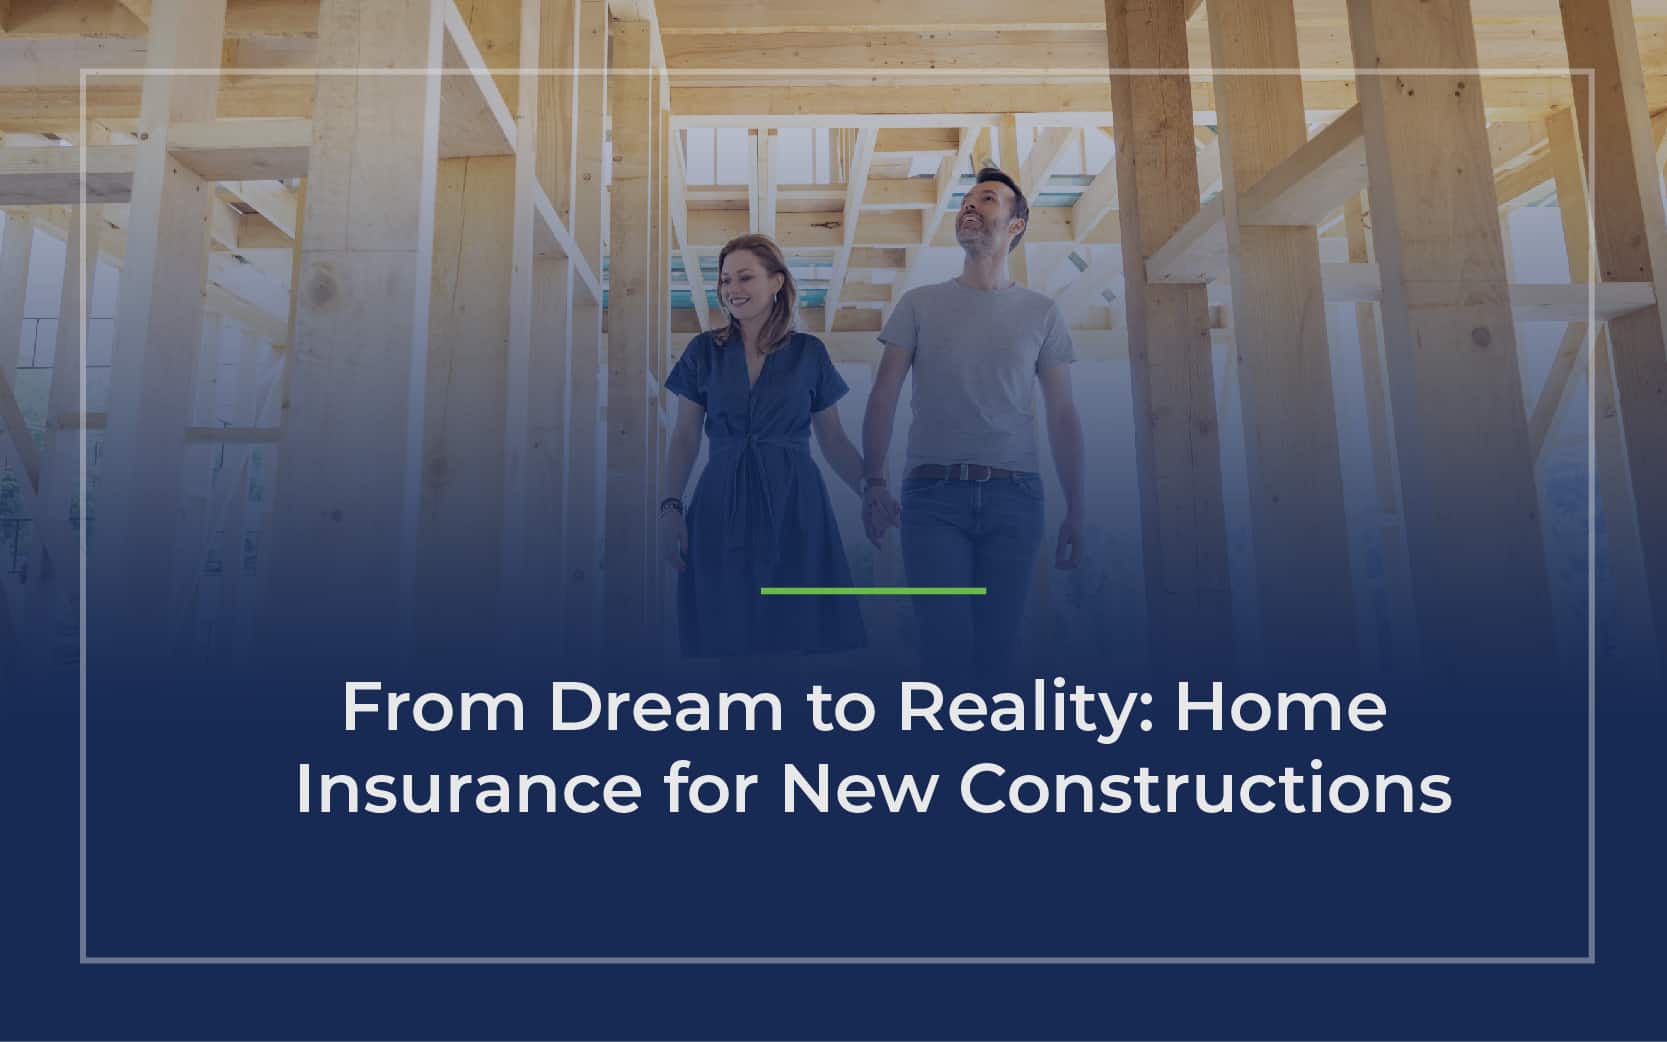 home insurance for new construction (also called builder's risk)